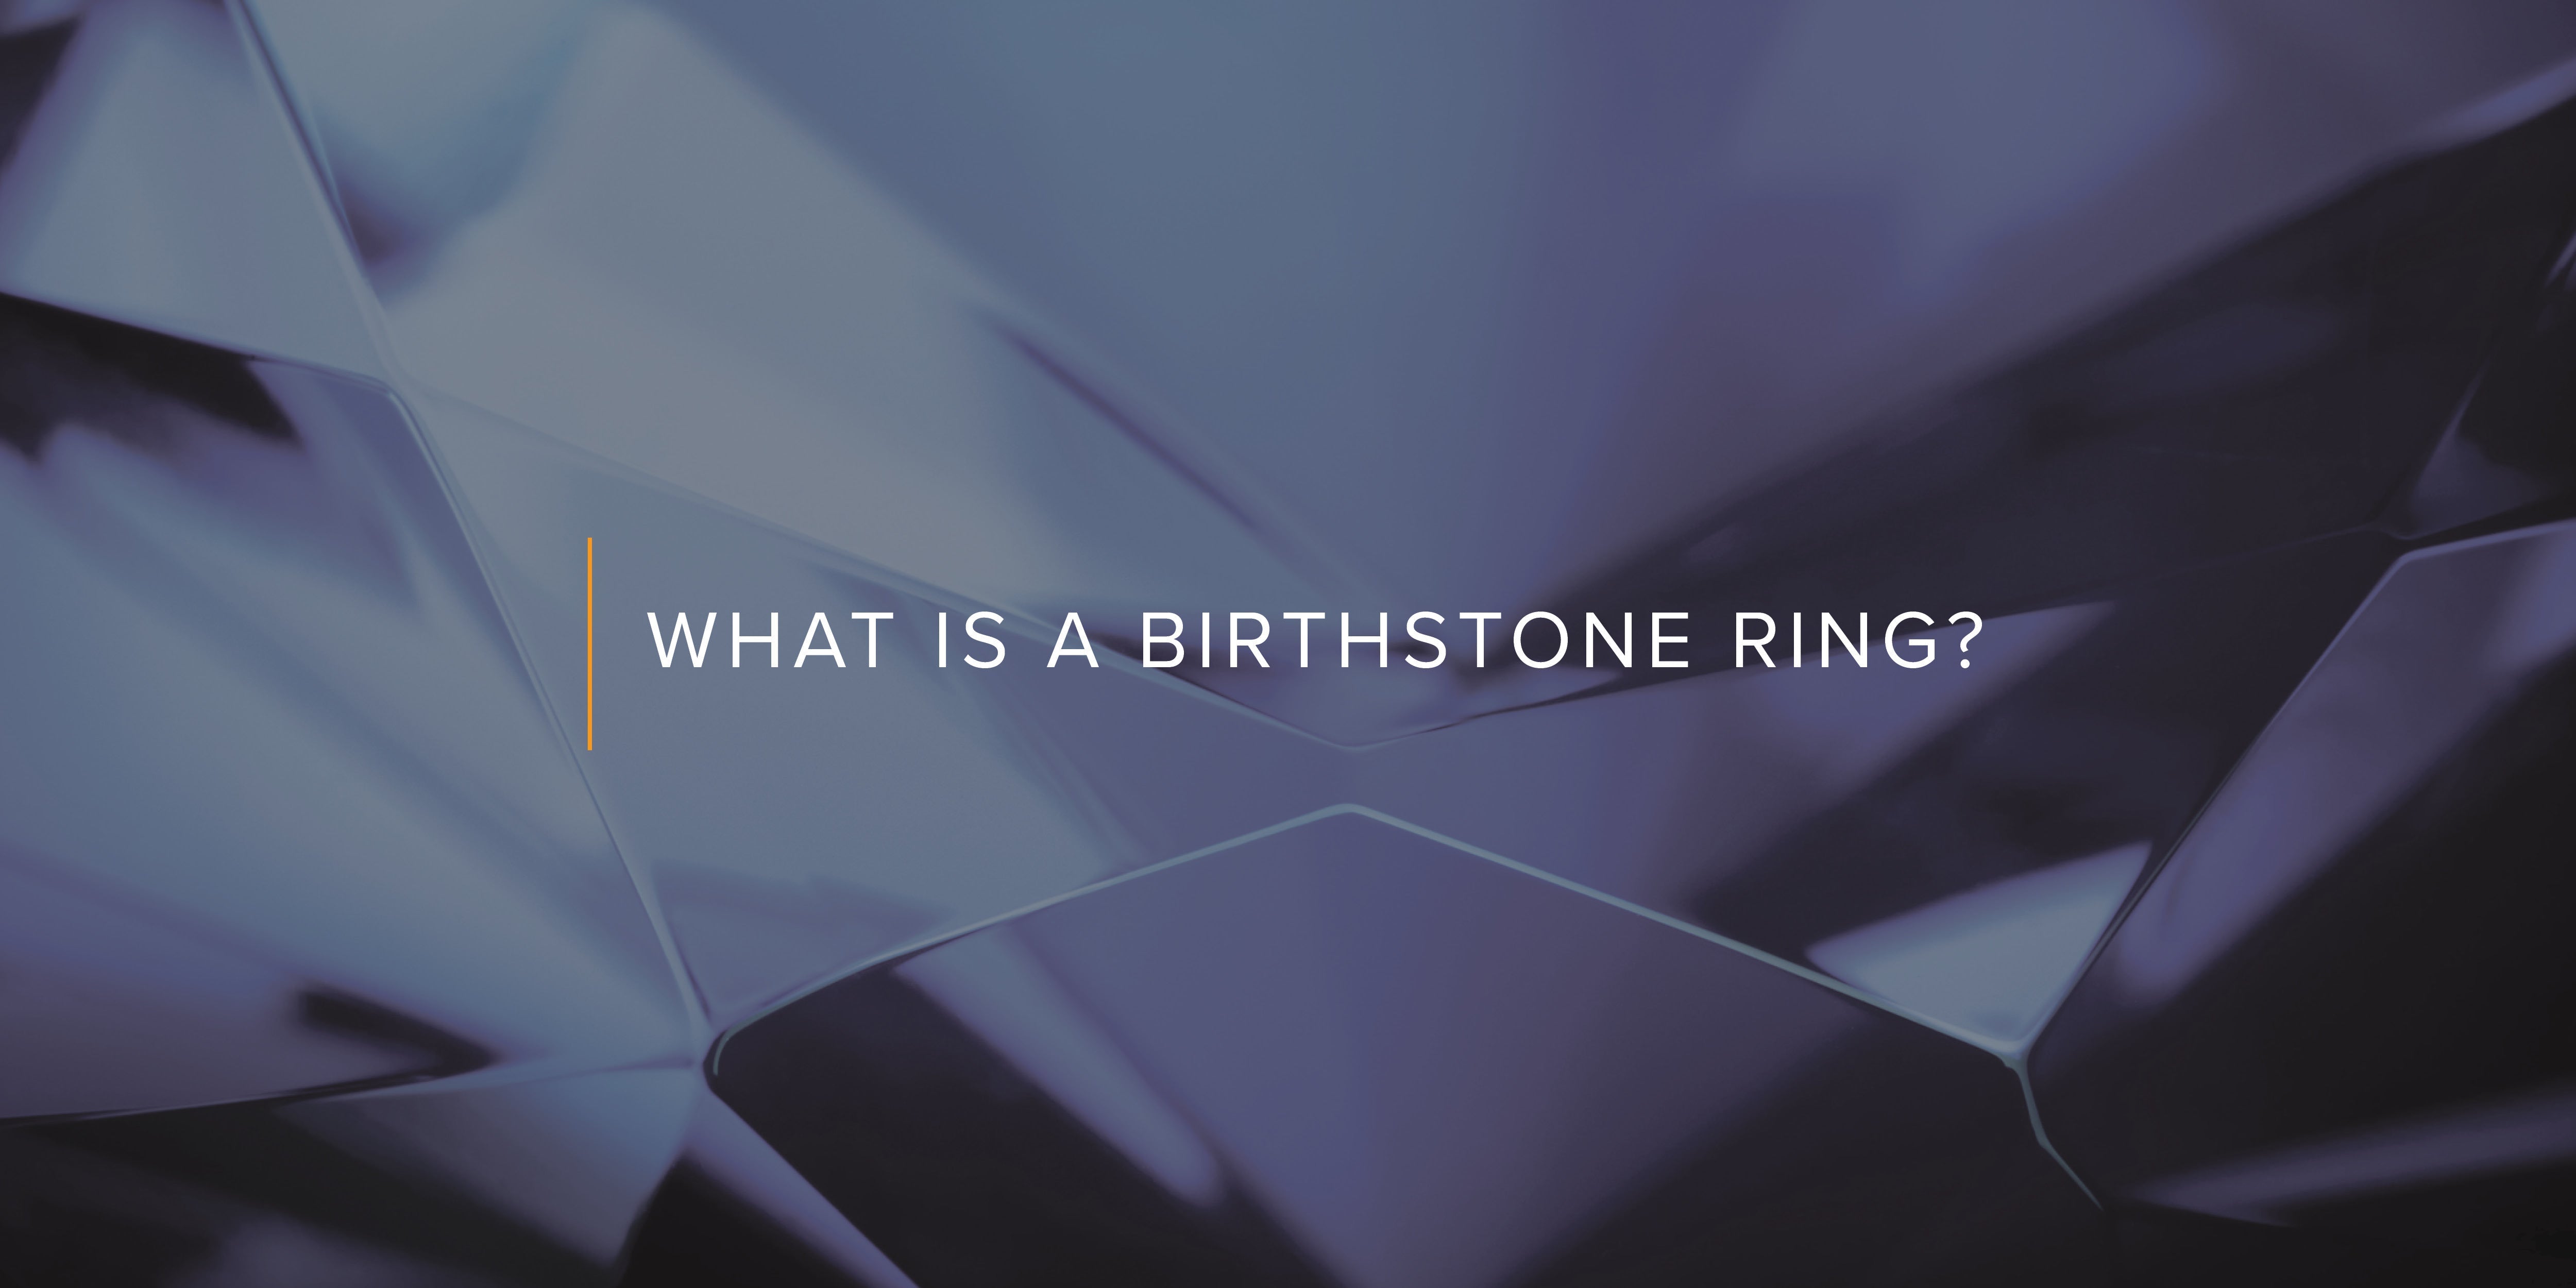 What is a Birthstone Ring?